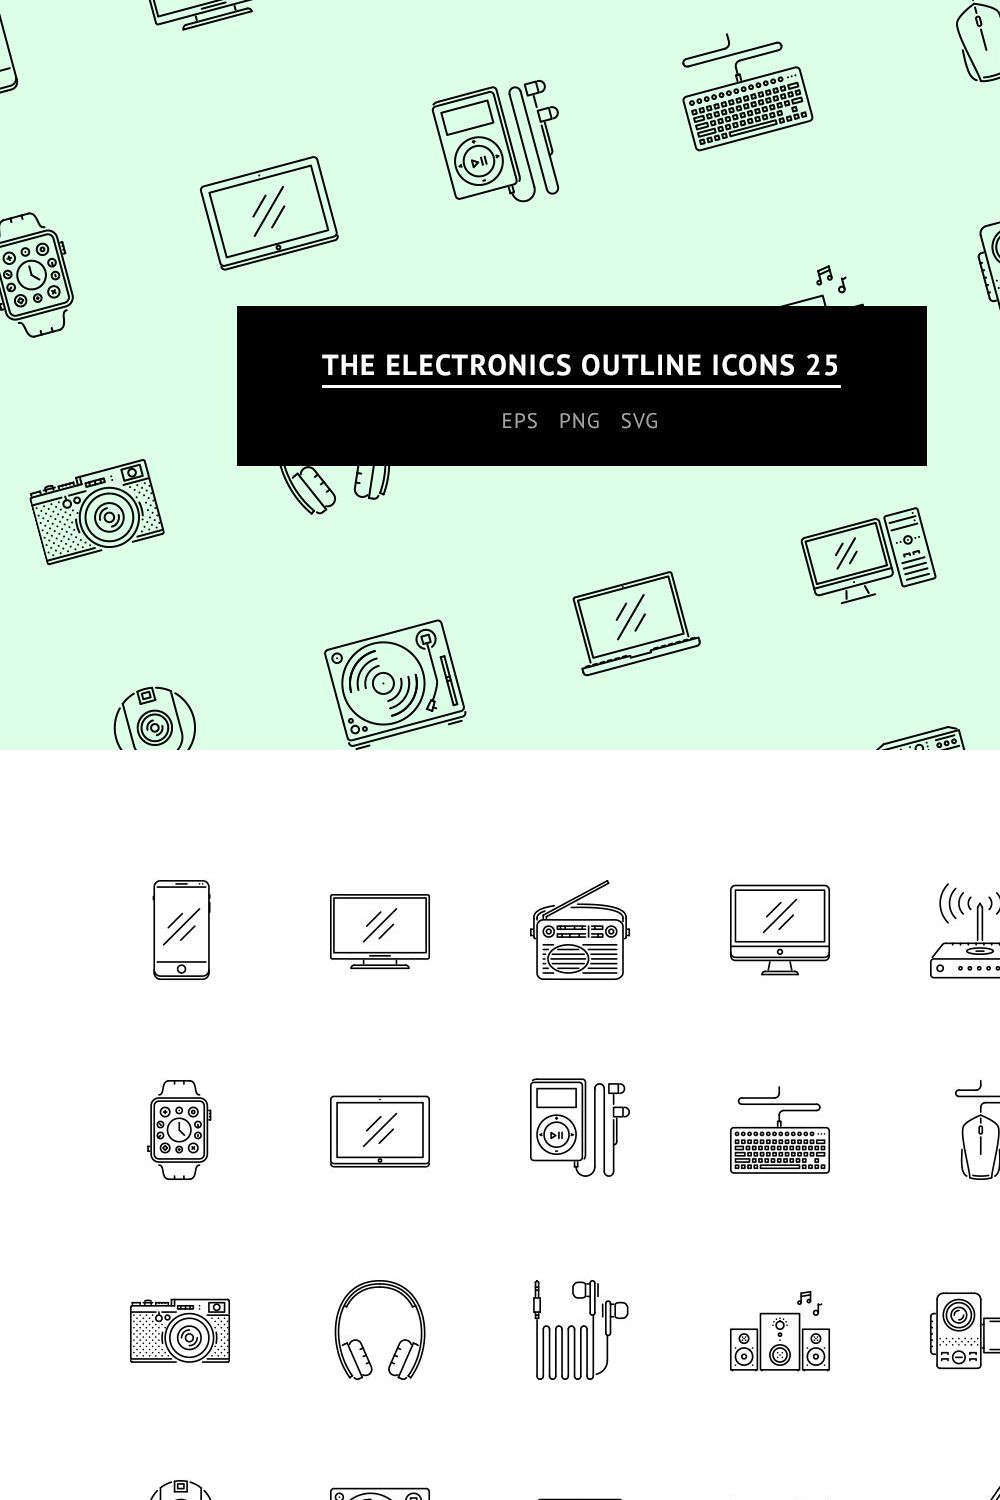 The Electronics Outline Icons 25 pinterest preview image.